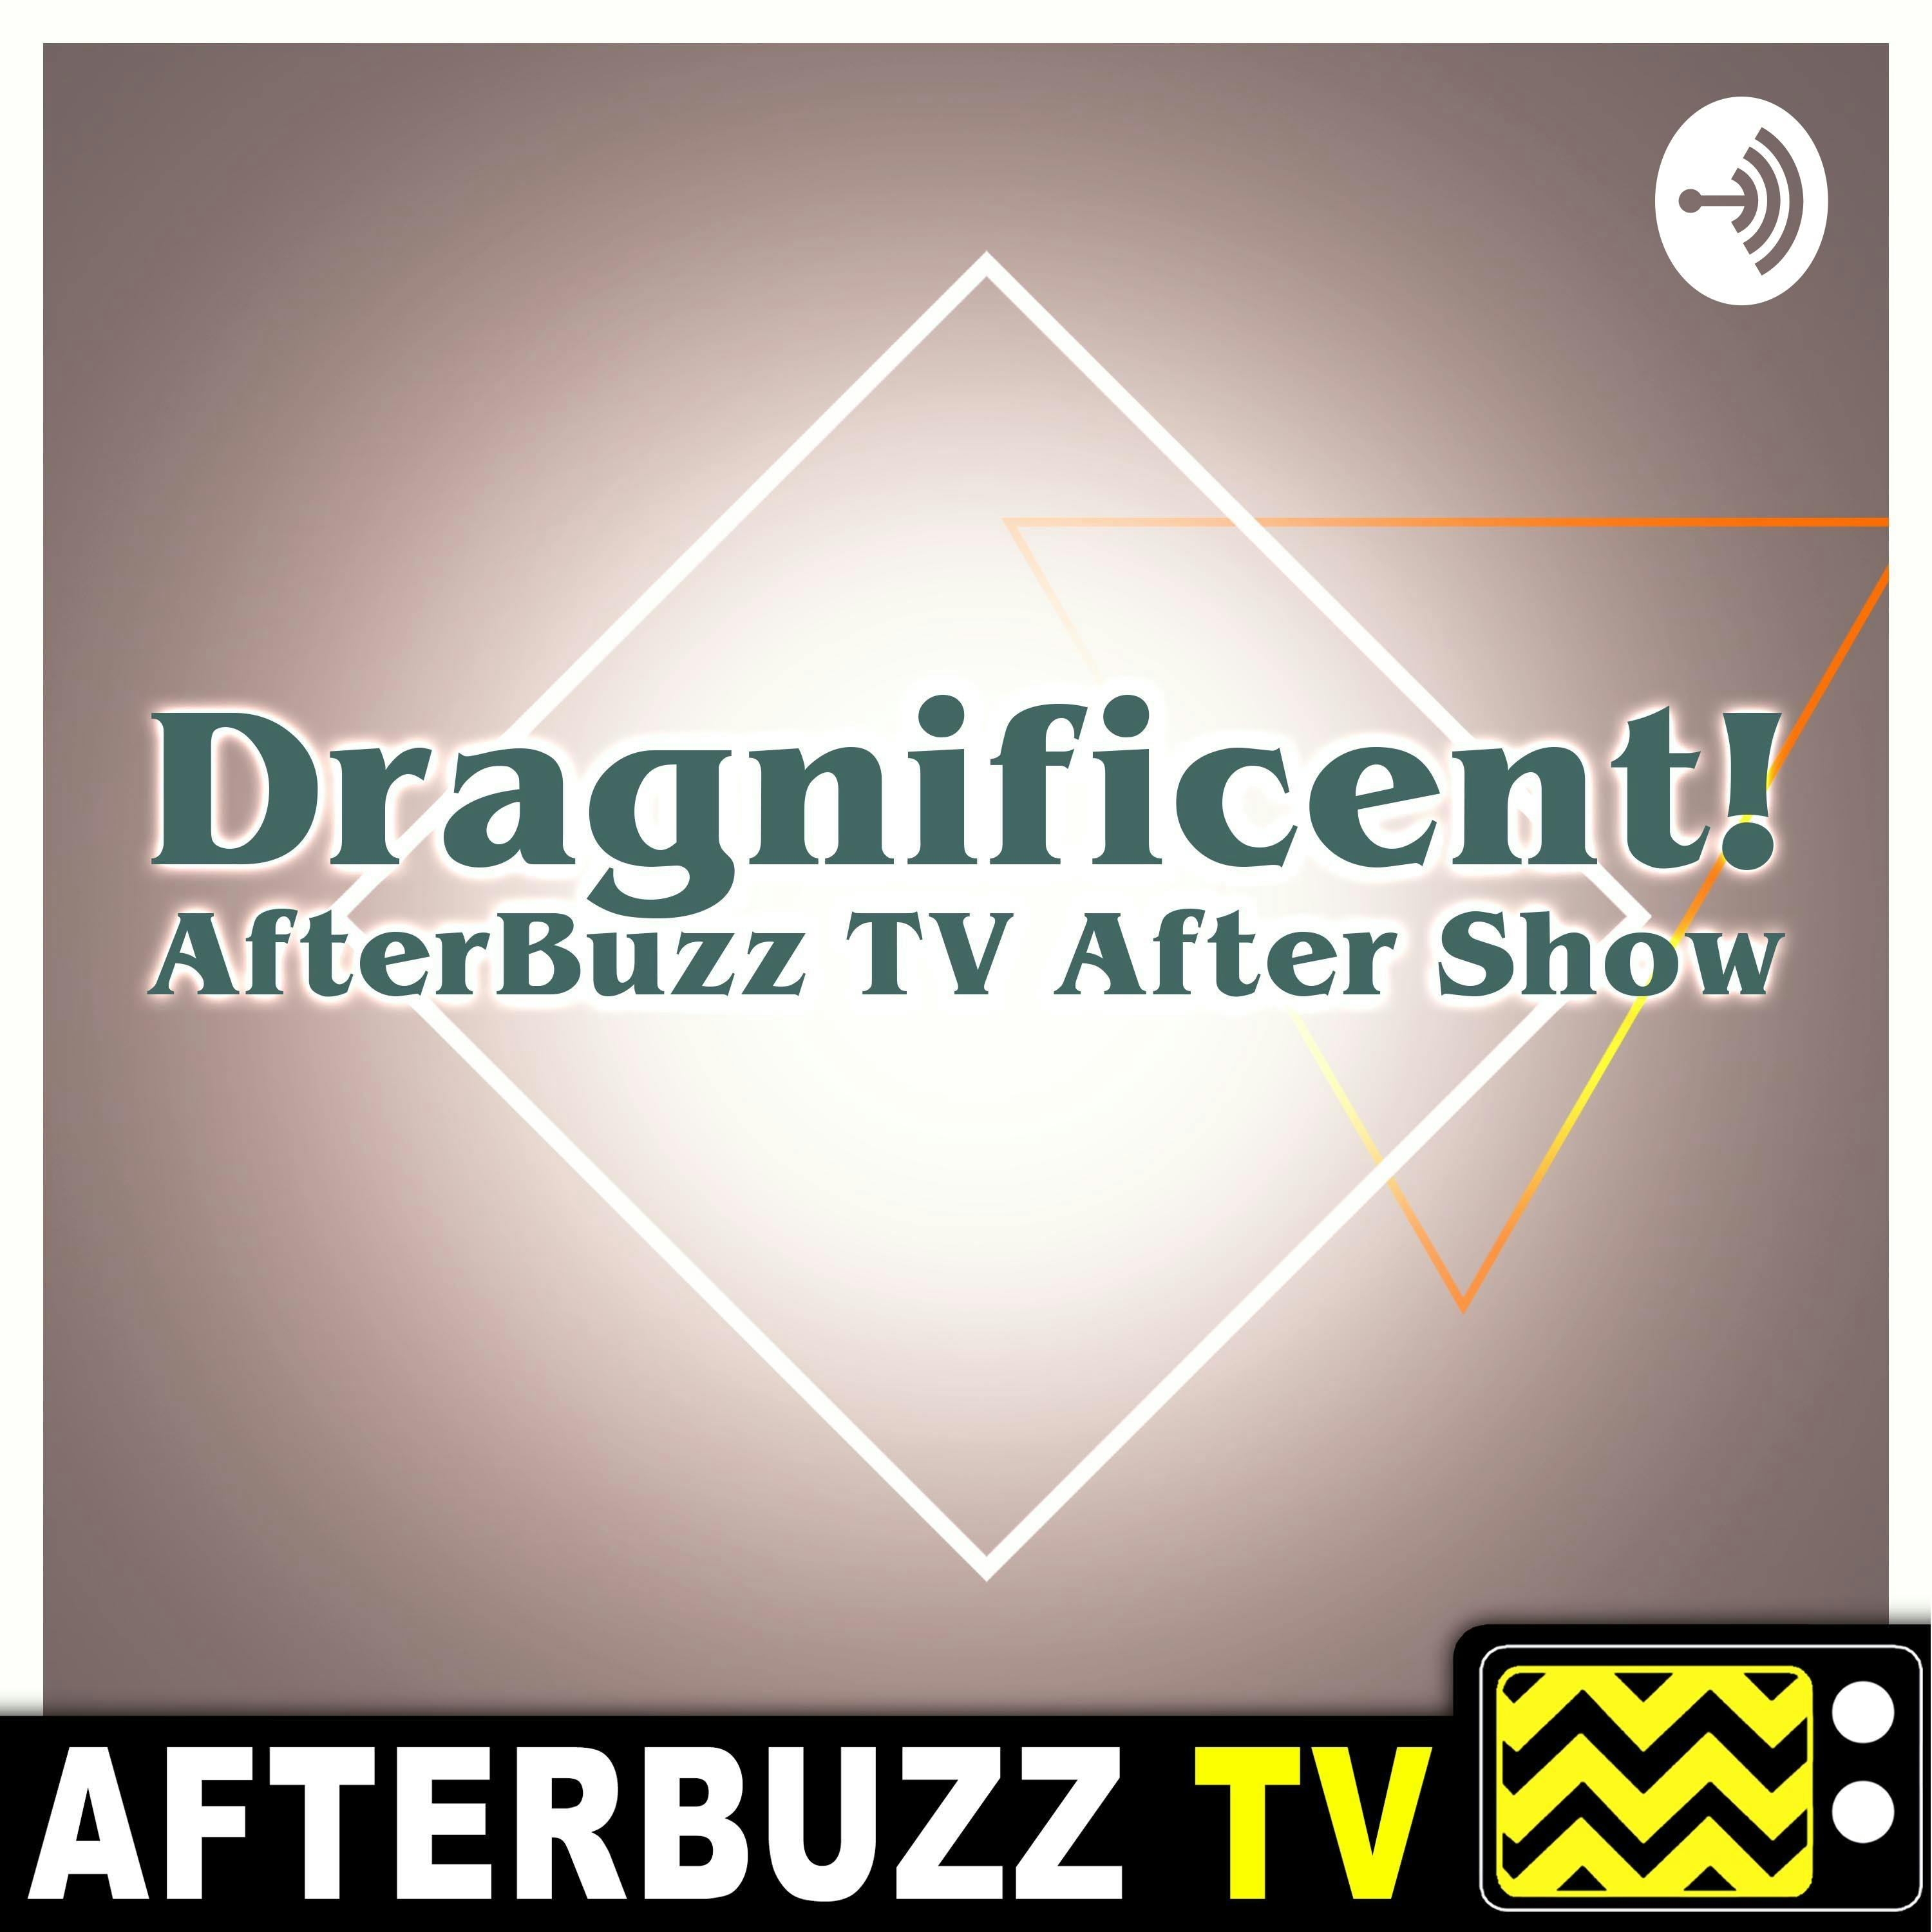 The Dragnificent After Show Podcast